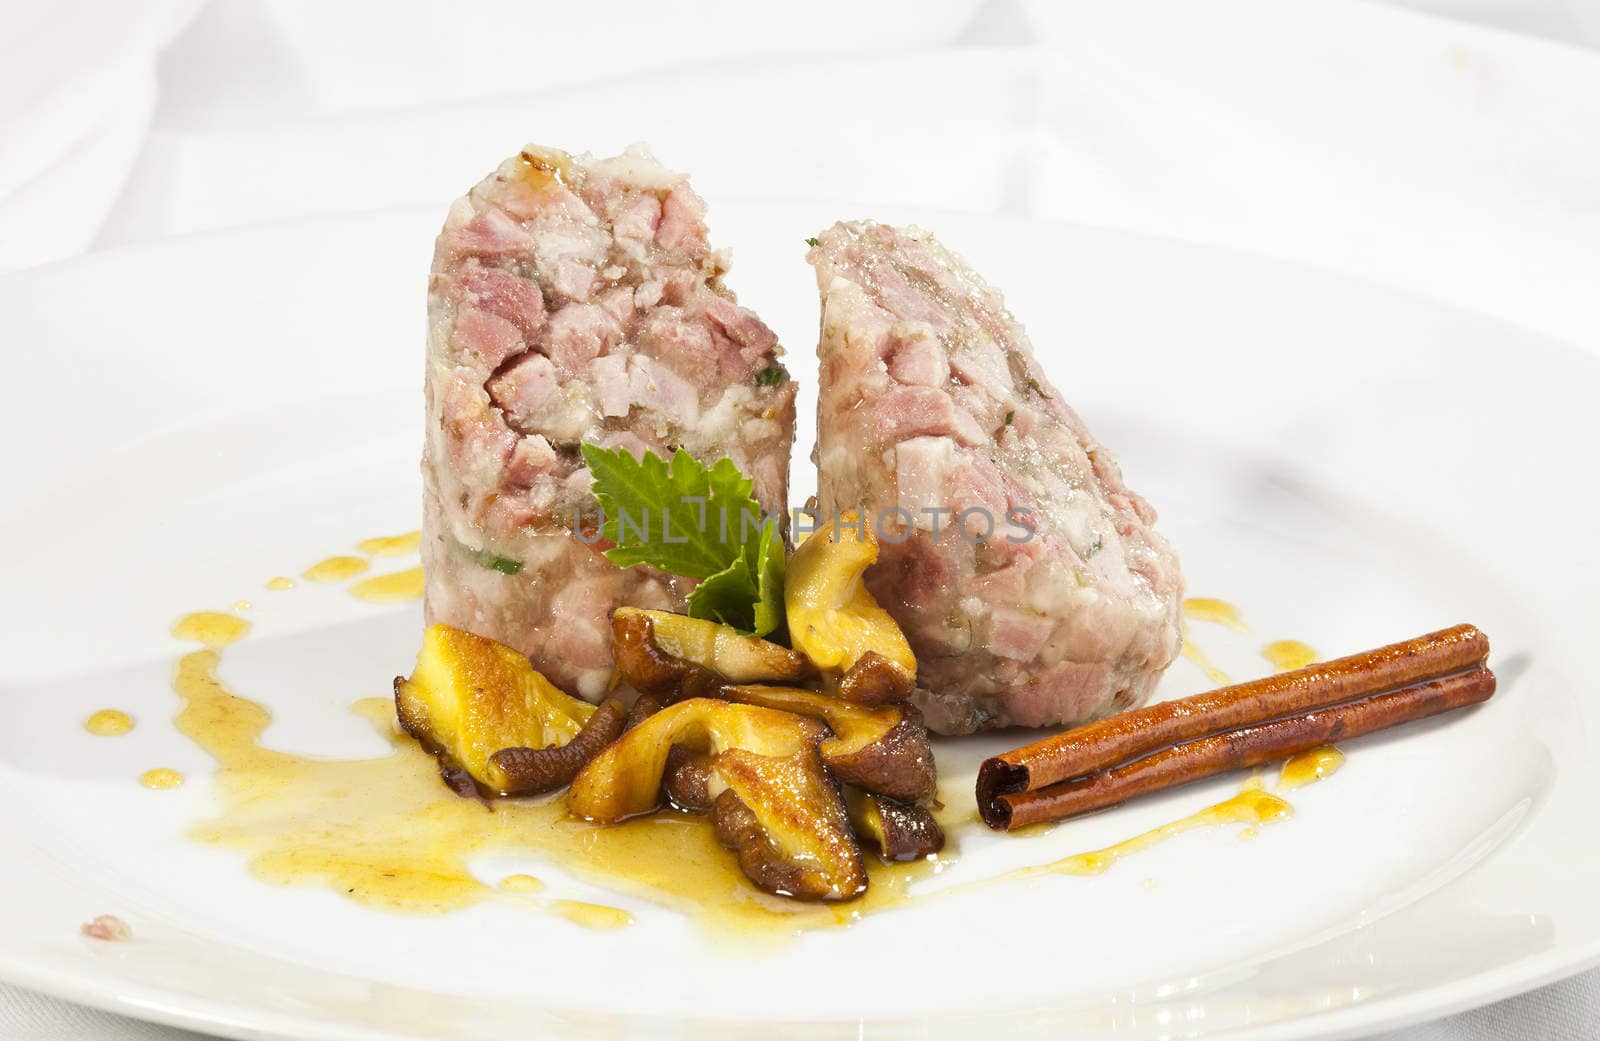 Headcheese with mushrooms and the cinamon